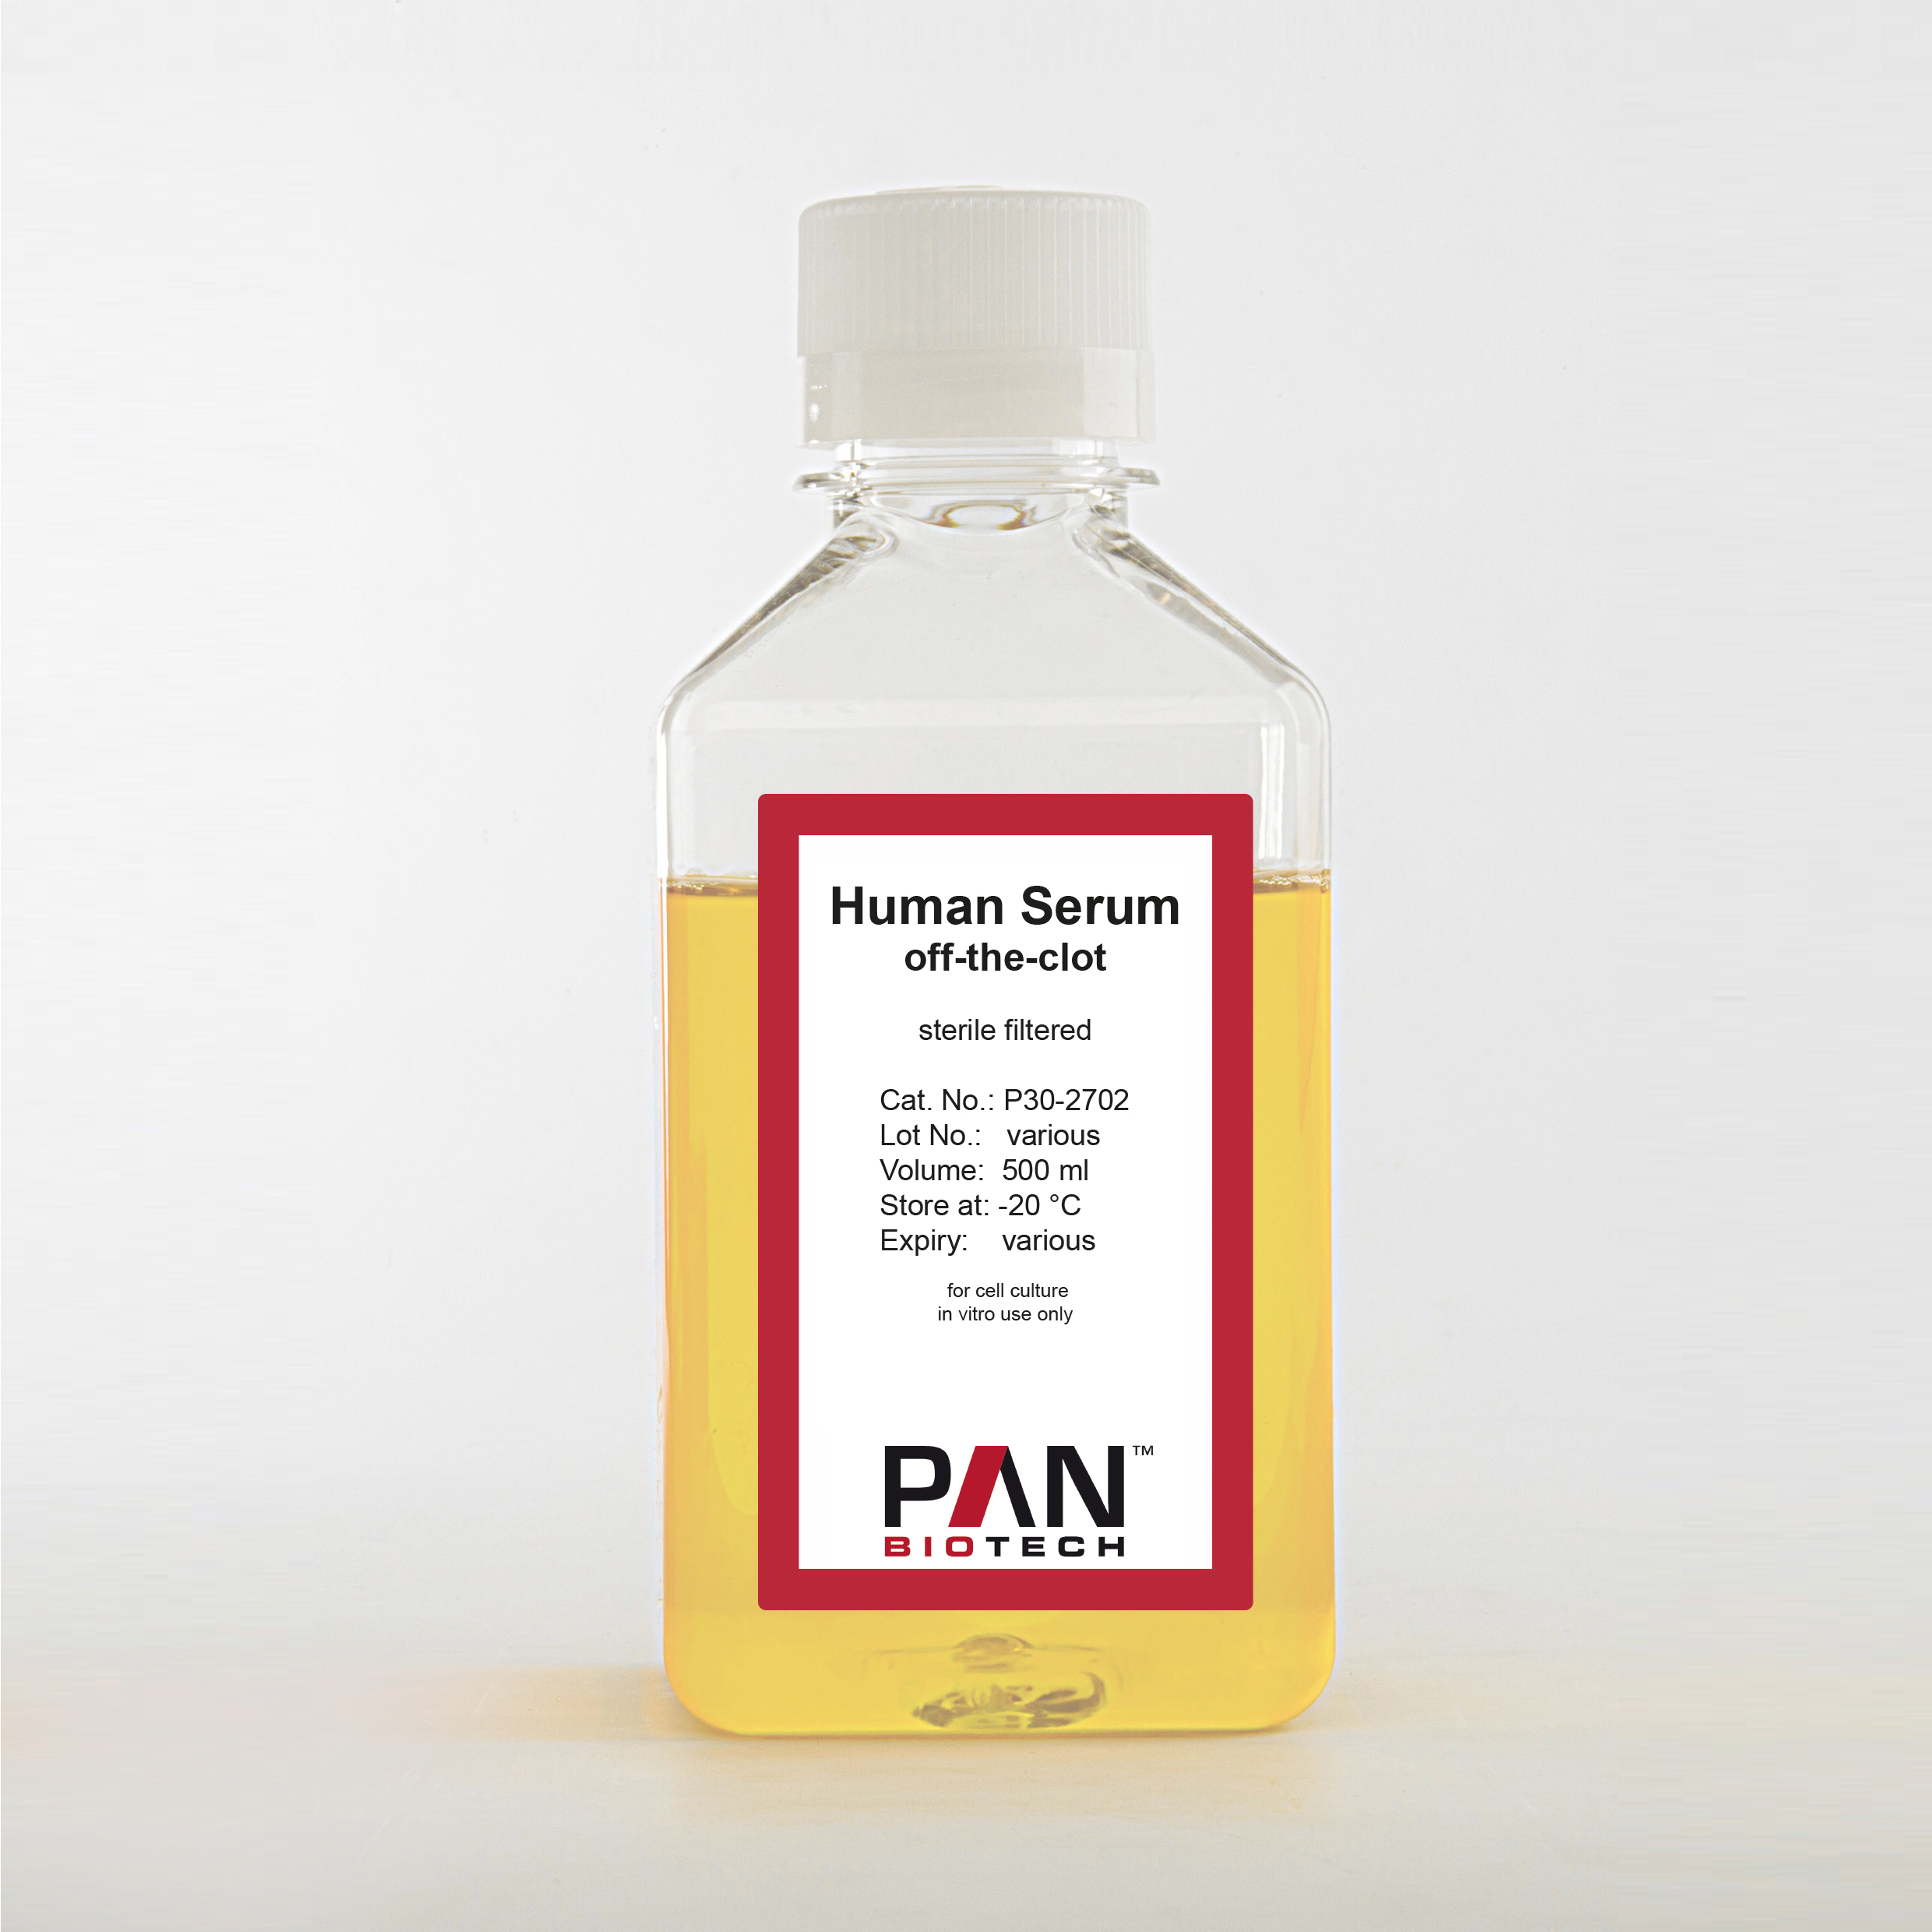 Human Serum off the clot, sterile filtered